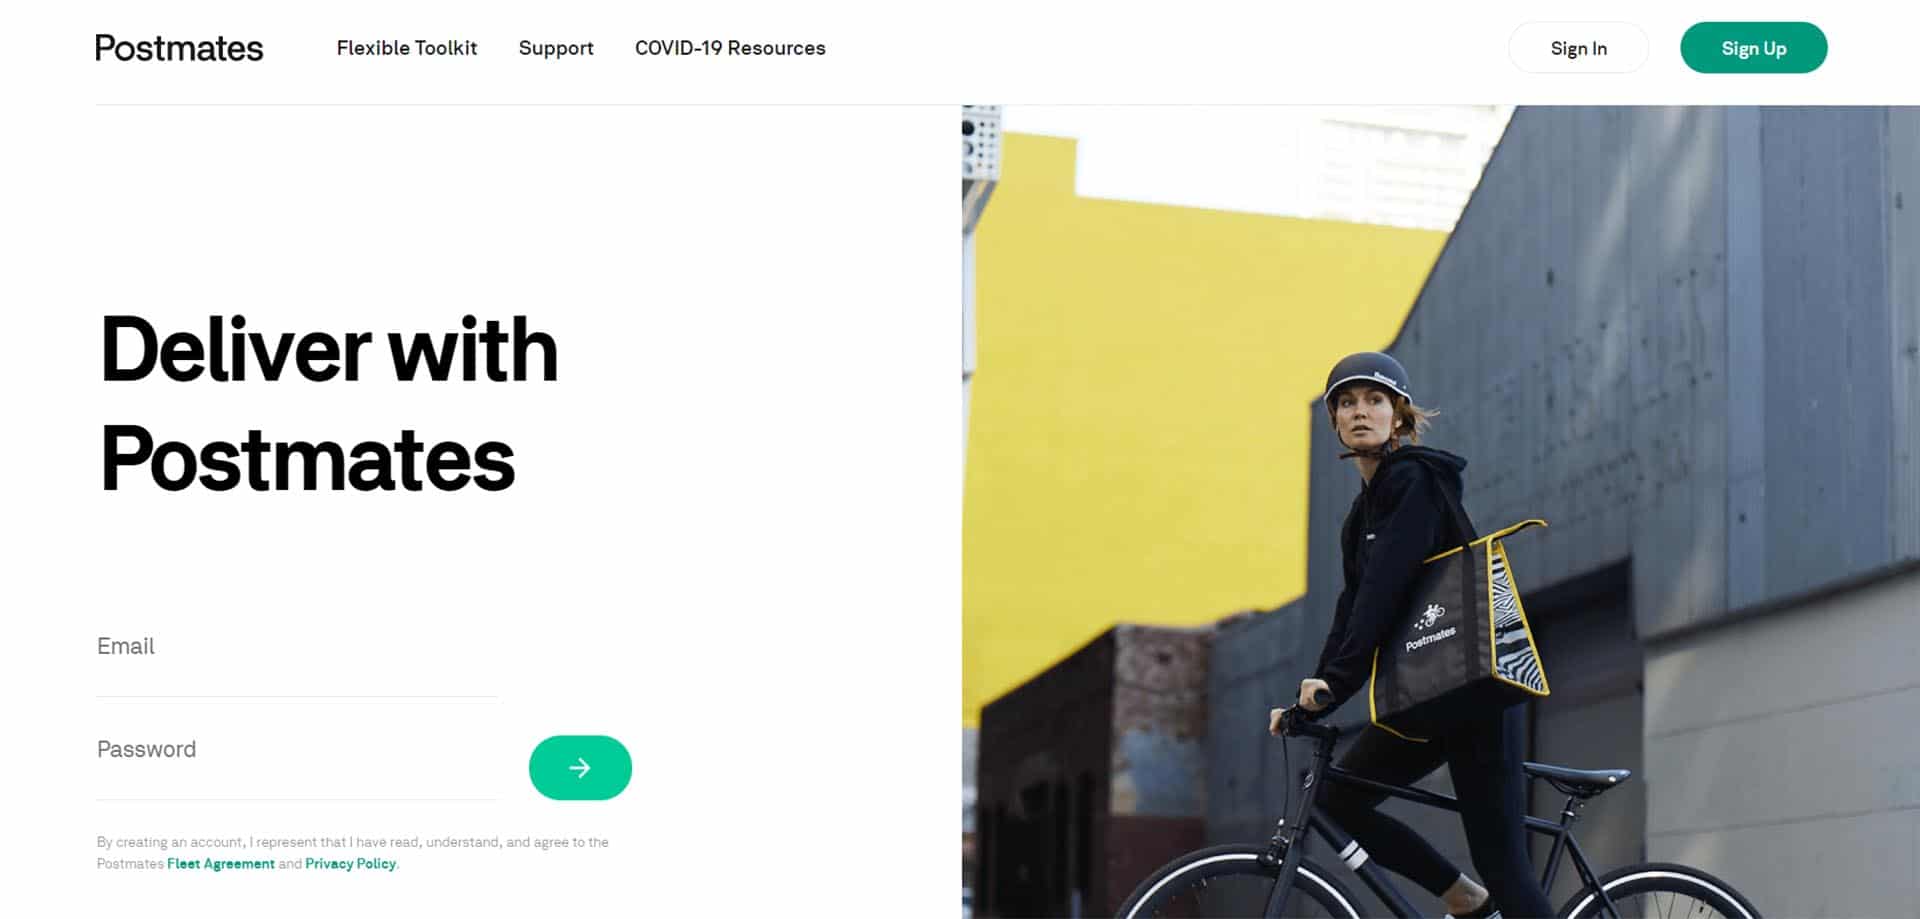 How to Apply Postmates Referral Codes